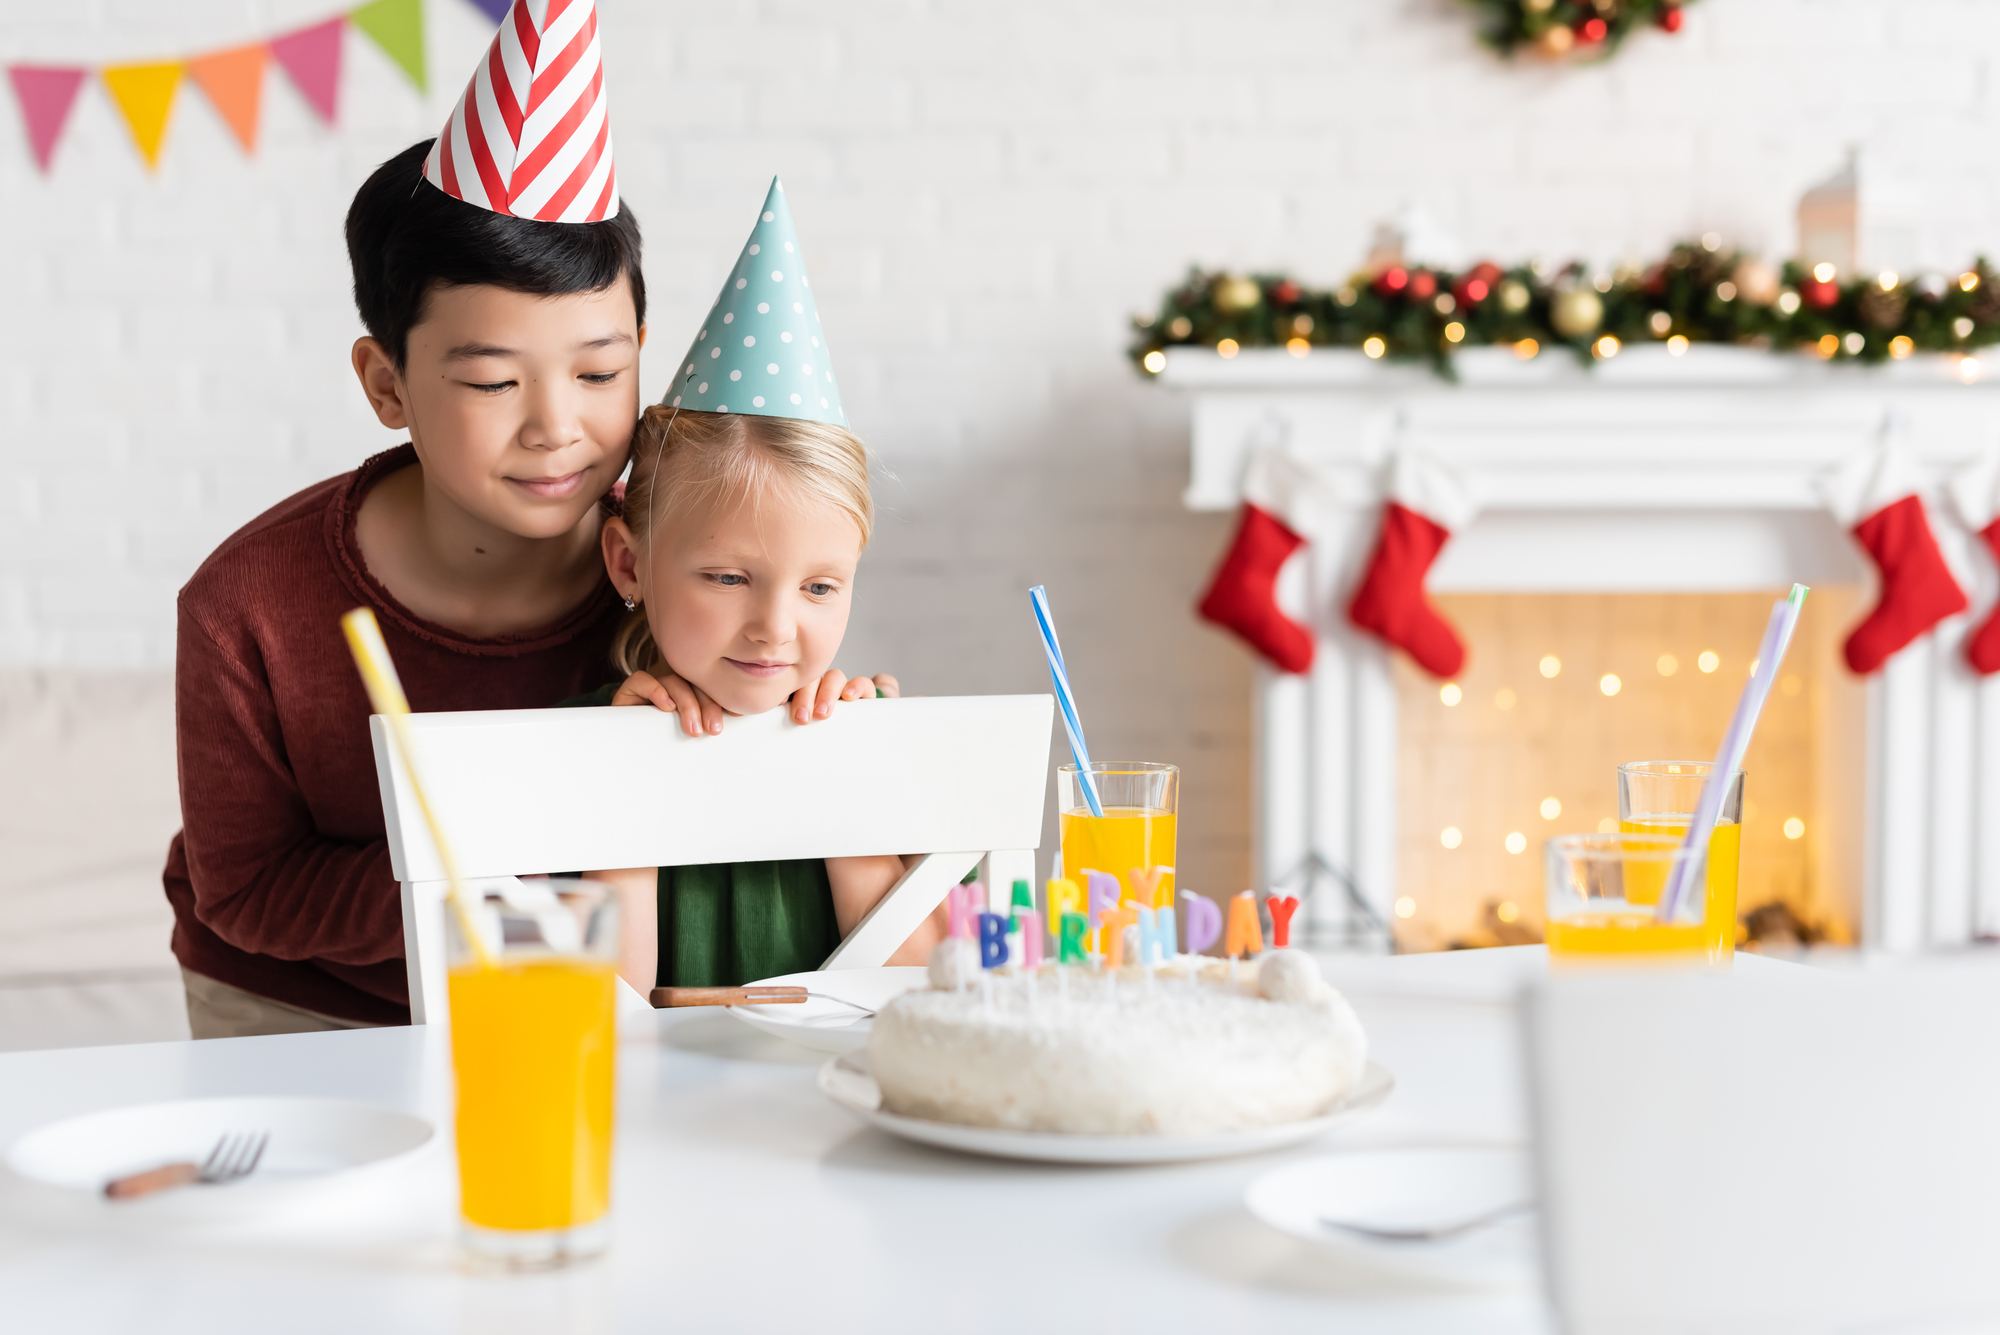 Here’s How To Make Sure Your December Baby’s Birthday Doesn’t Suck